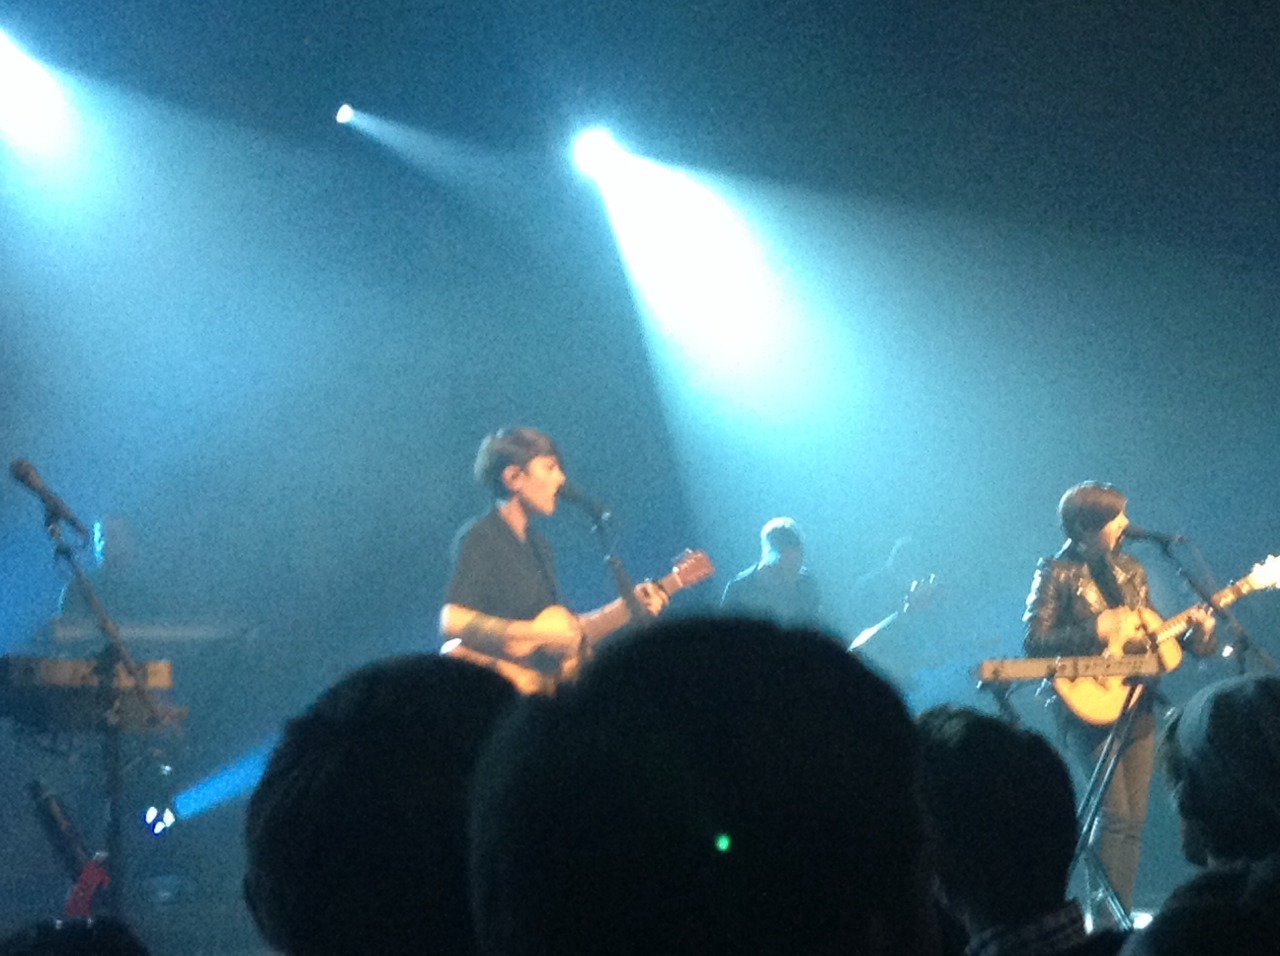 More Tegan and Sara pics They are so prettyyyy